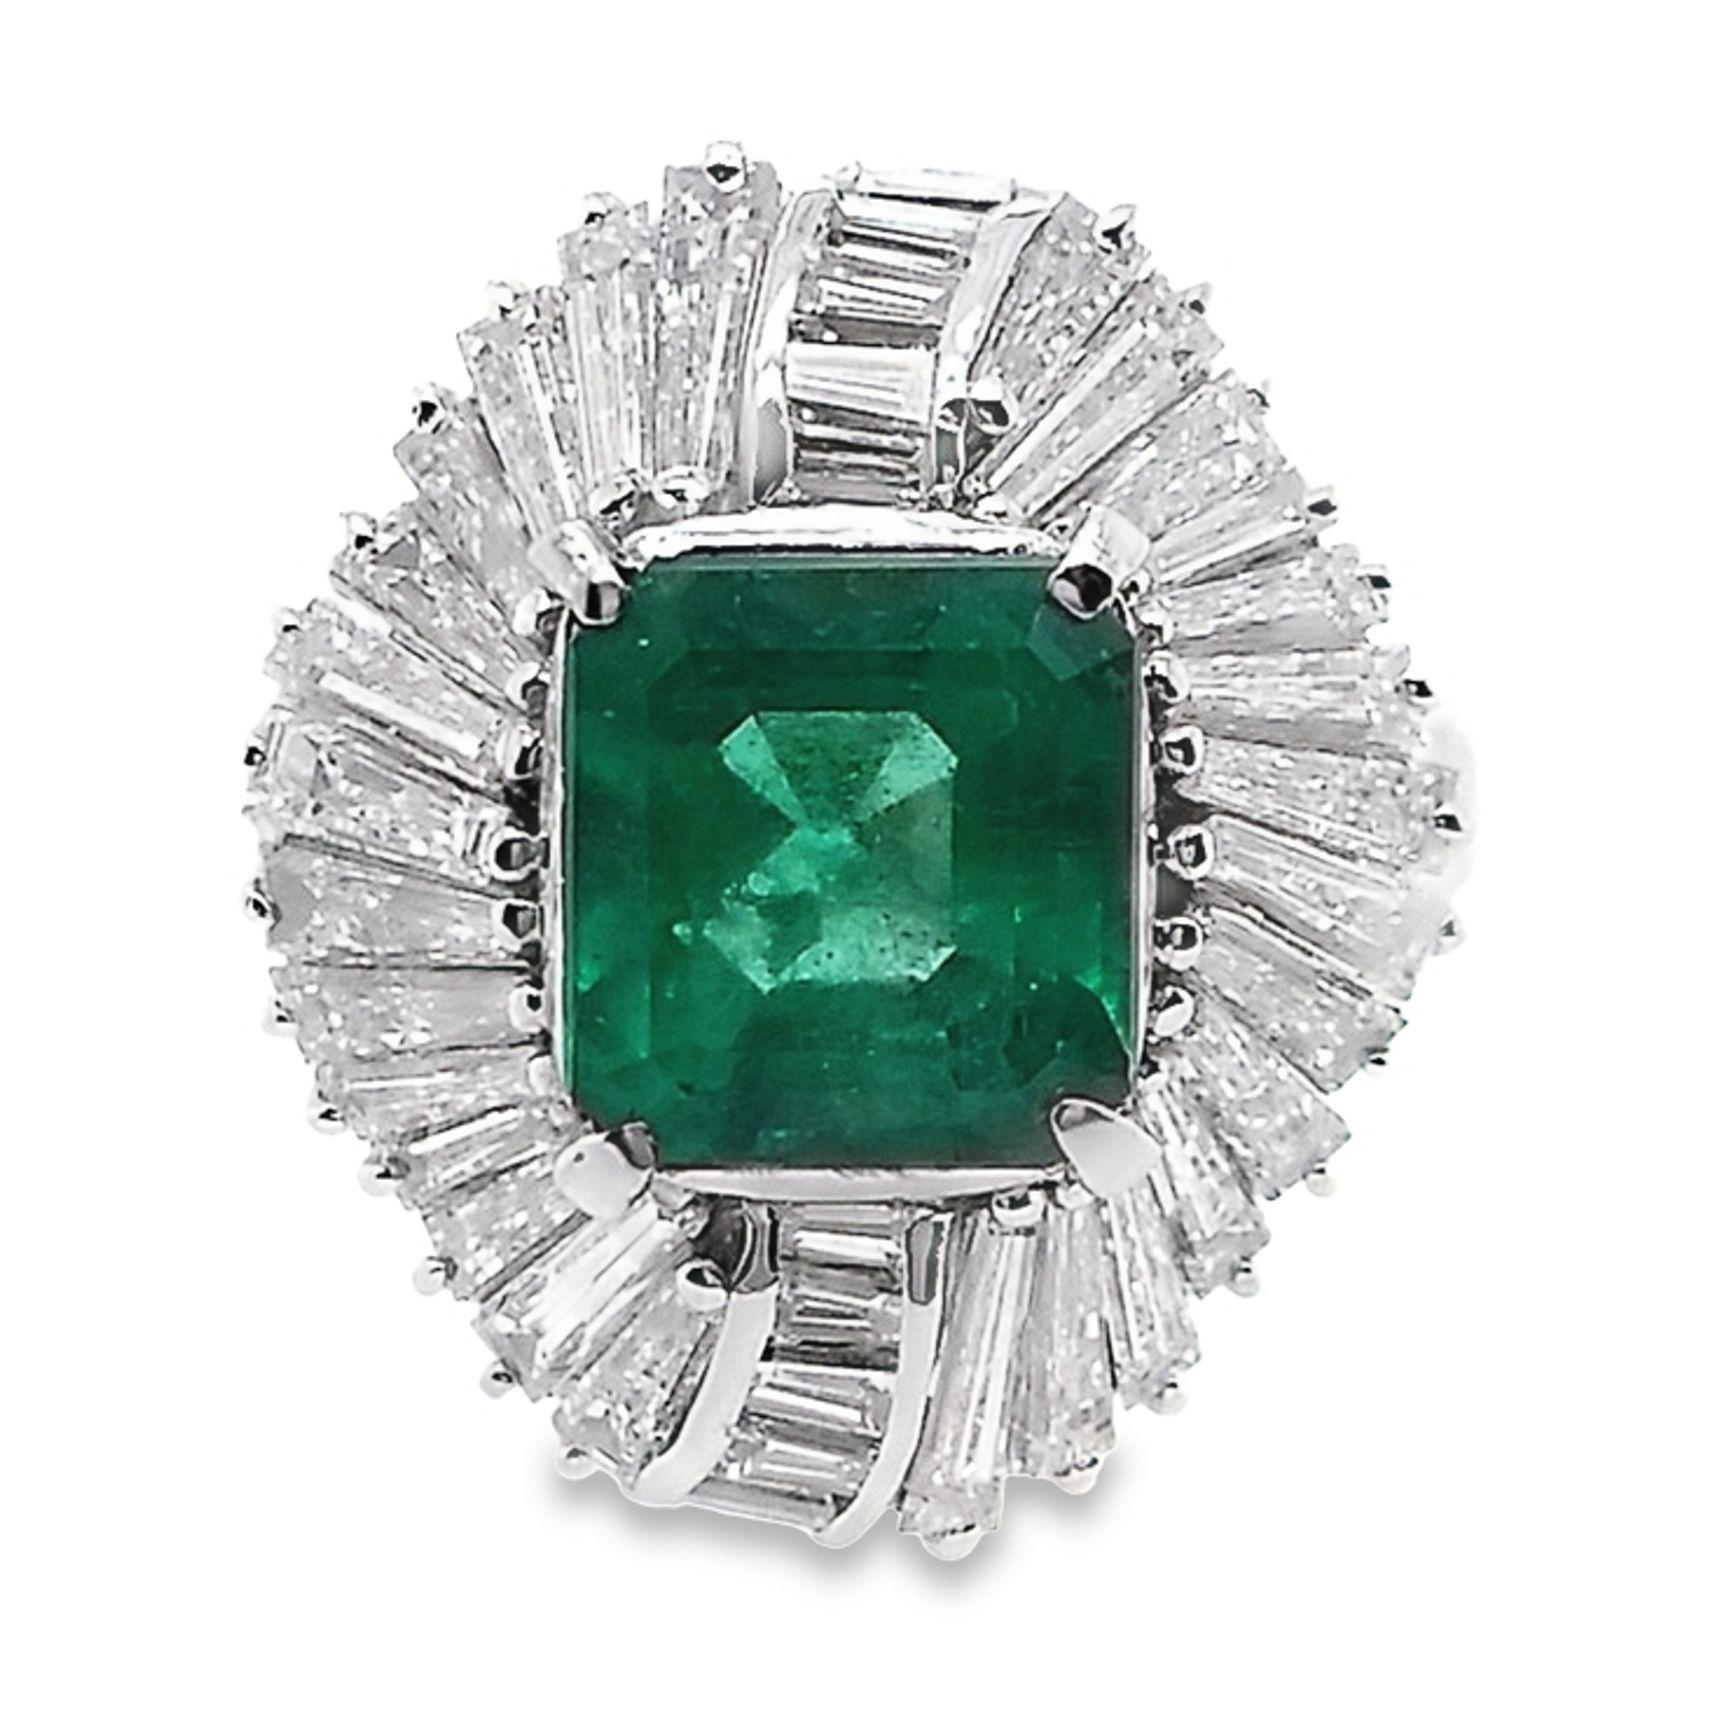 Immerse yourself in the splendour of this platinum ring, boasting a 3.13ct Not-Treated Colombia Emerald and 2.40ct Natural Diamonds, as validated by an IGI Report. The emerald's captivating Intense Bluish Green hue, untouched by treatments, exudes